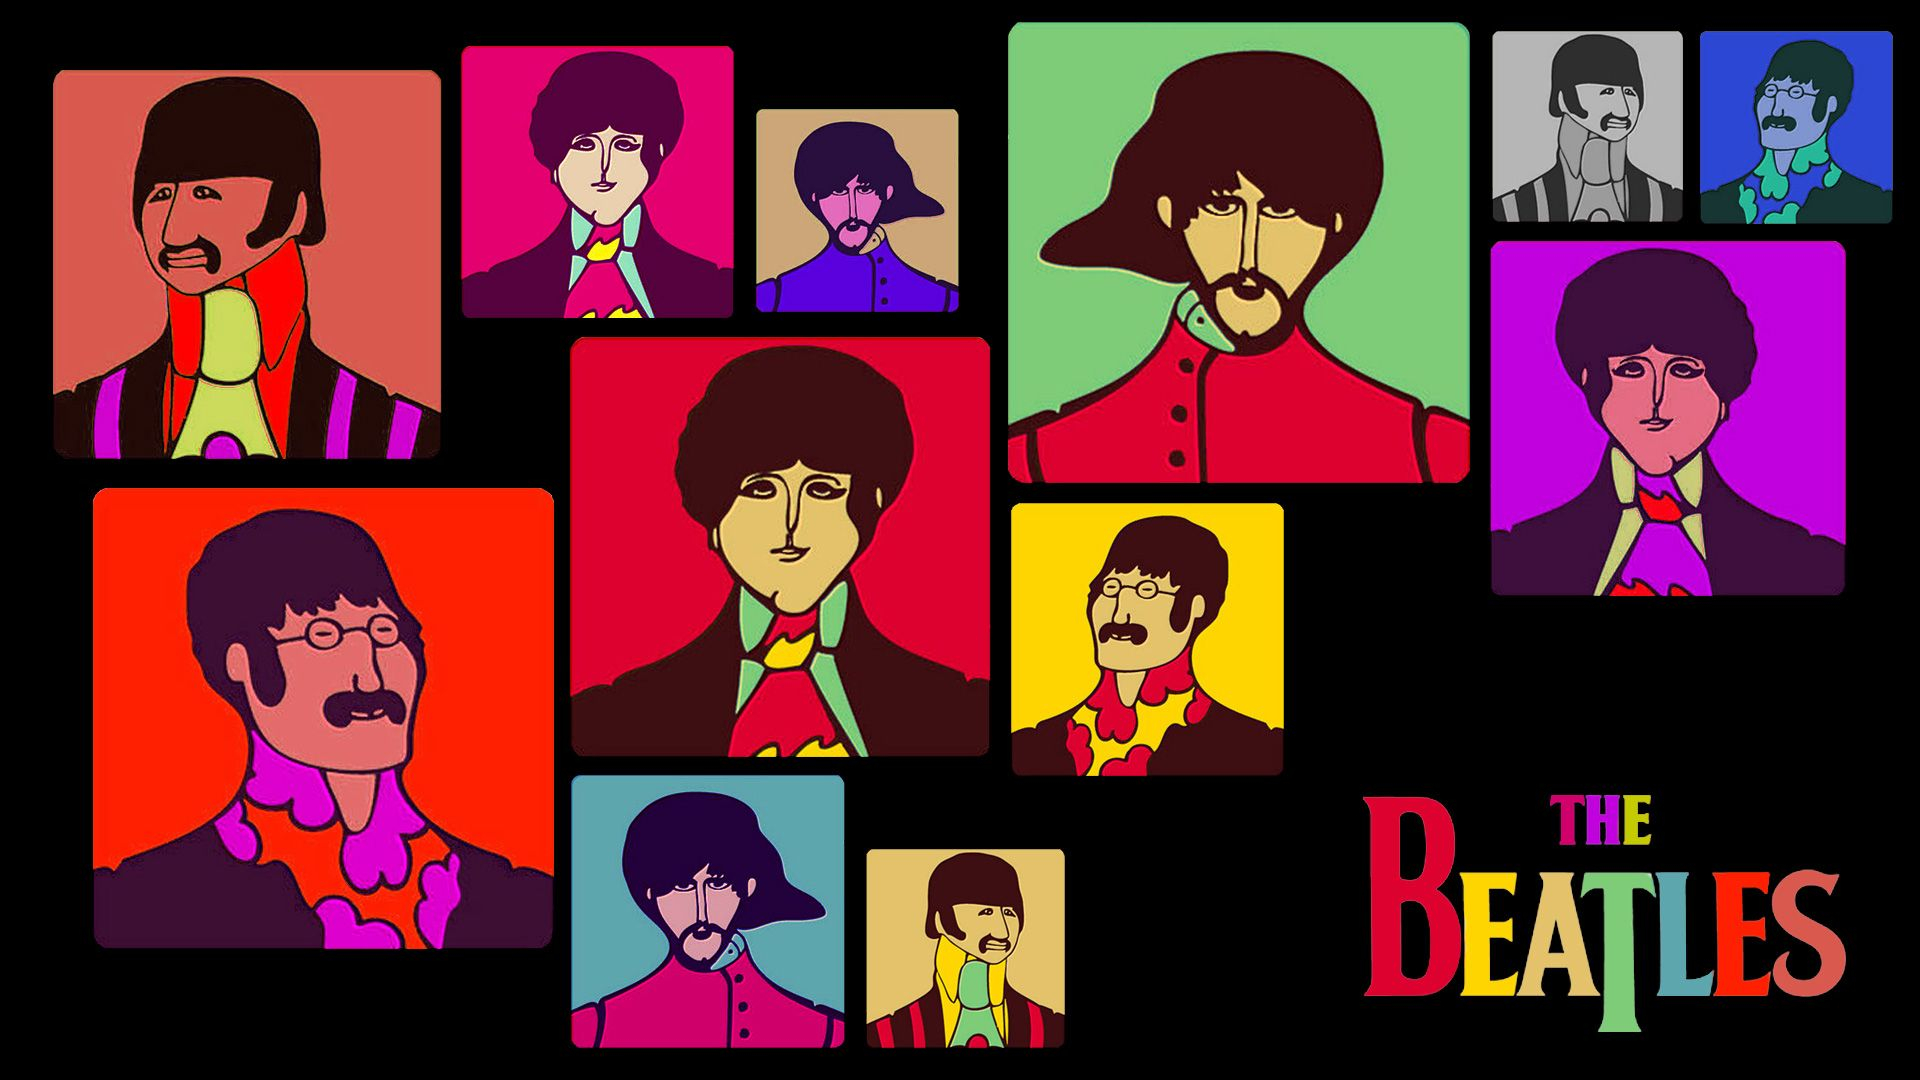 1920x1080 The Beatles Yellow Submarine Wallpaper by | Yellow submarine, Beatles yellow, The beatles